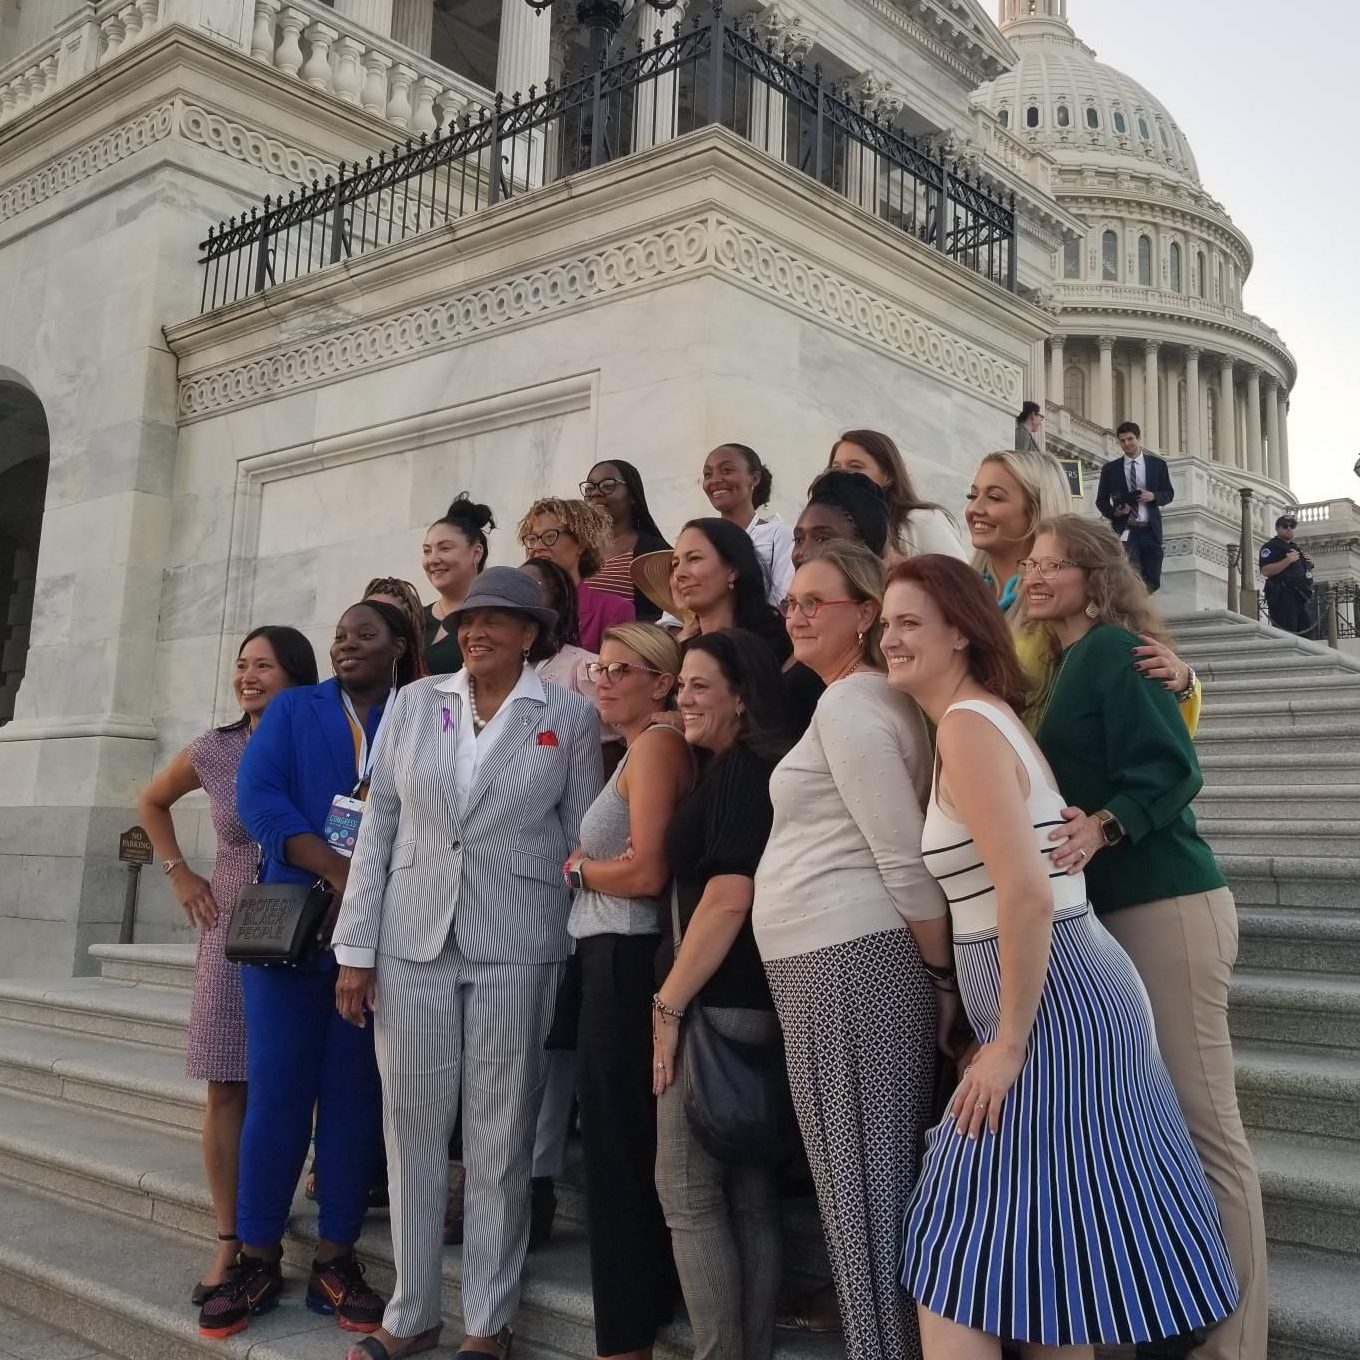 Stillbirth prevention advocates on the steps of the Capitol with Congresswoman Alma Adams.